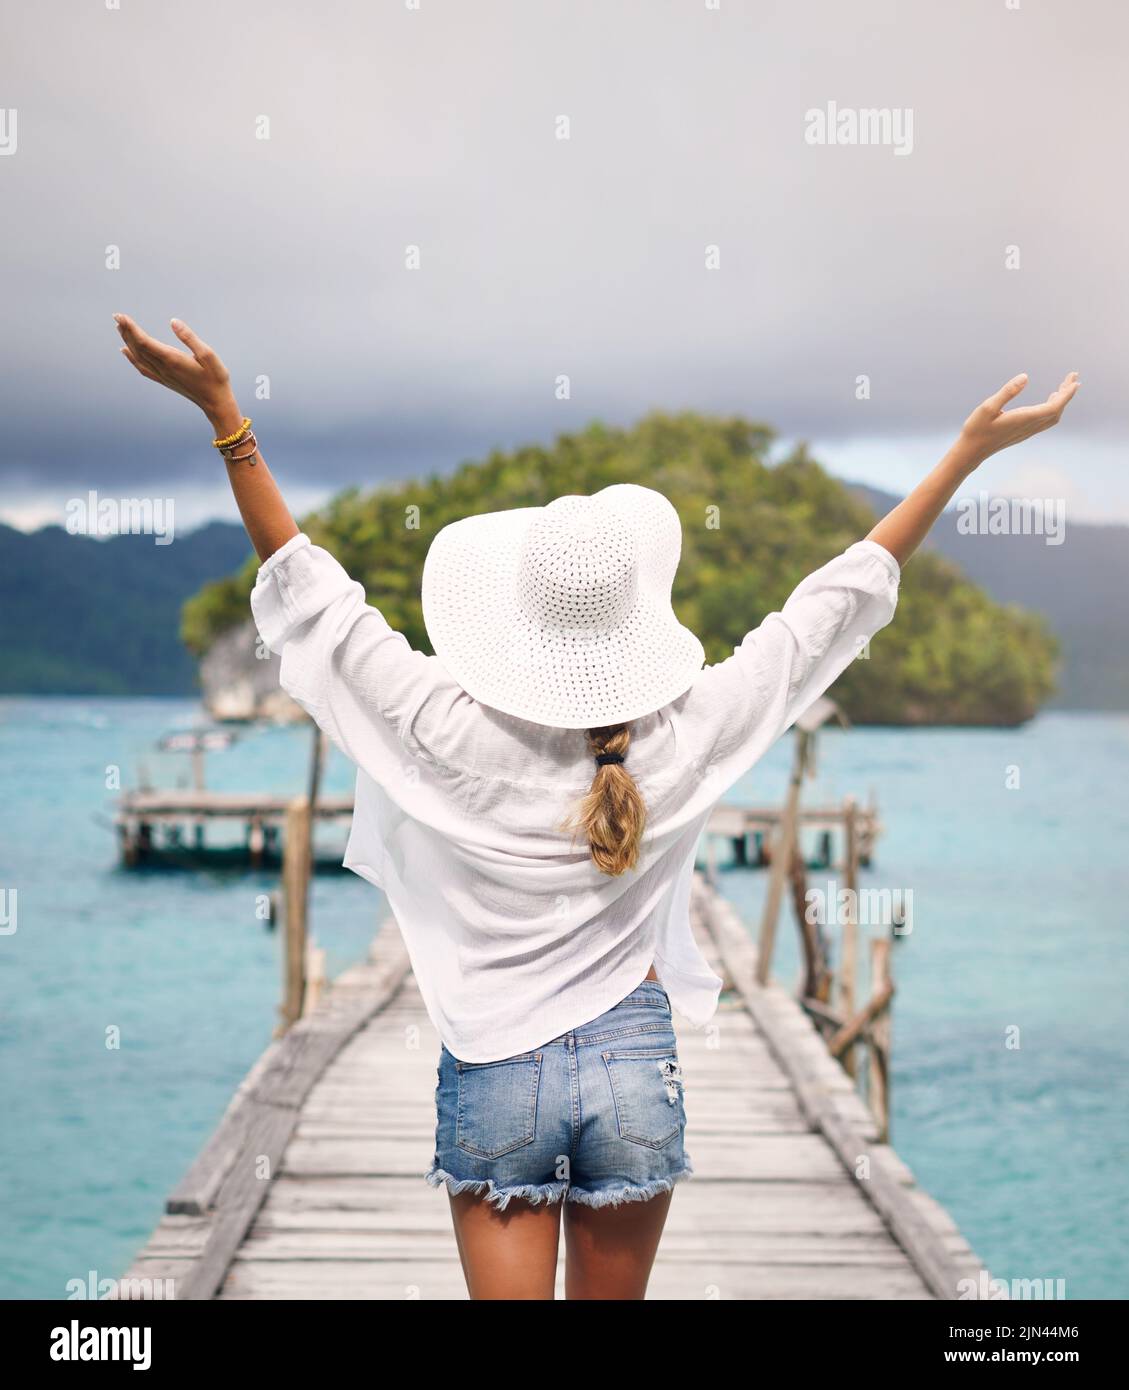 I waited so long for this holiday. Rearview shot of an unrecognizable woman standing with her arms raised on a boardwalk overlooking the sea during Stock Photo